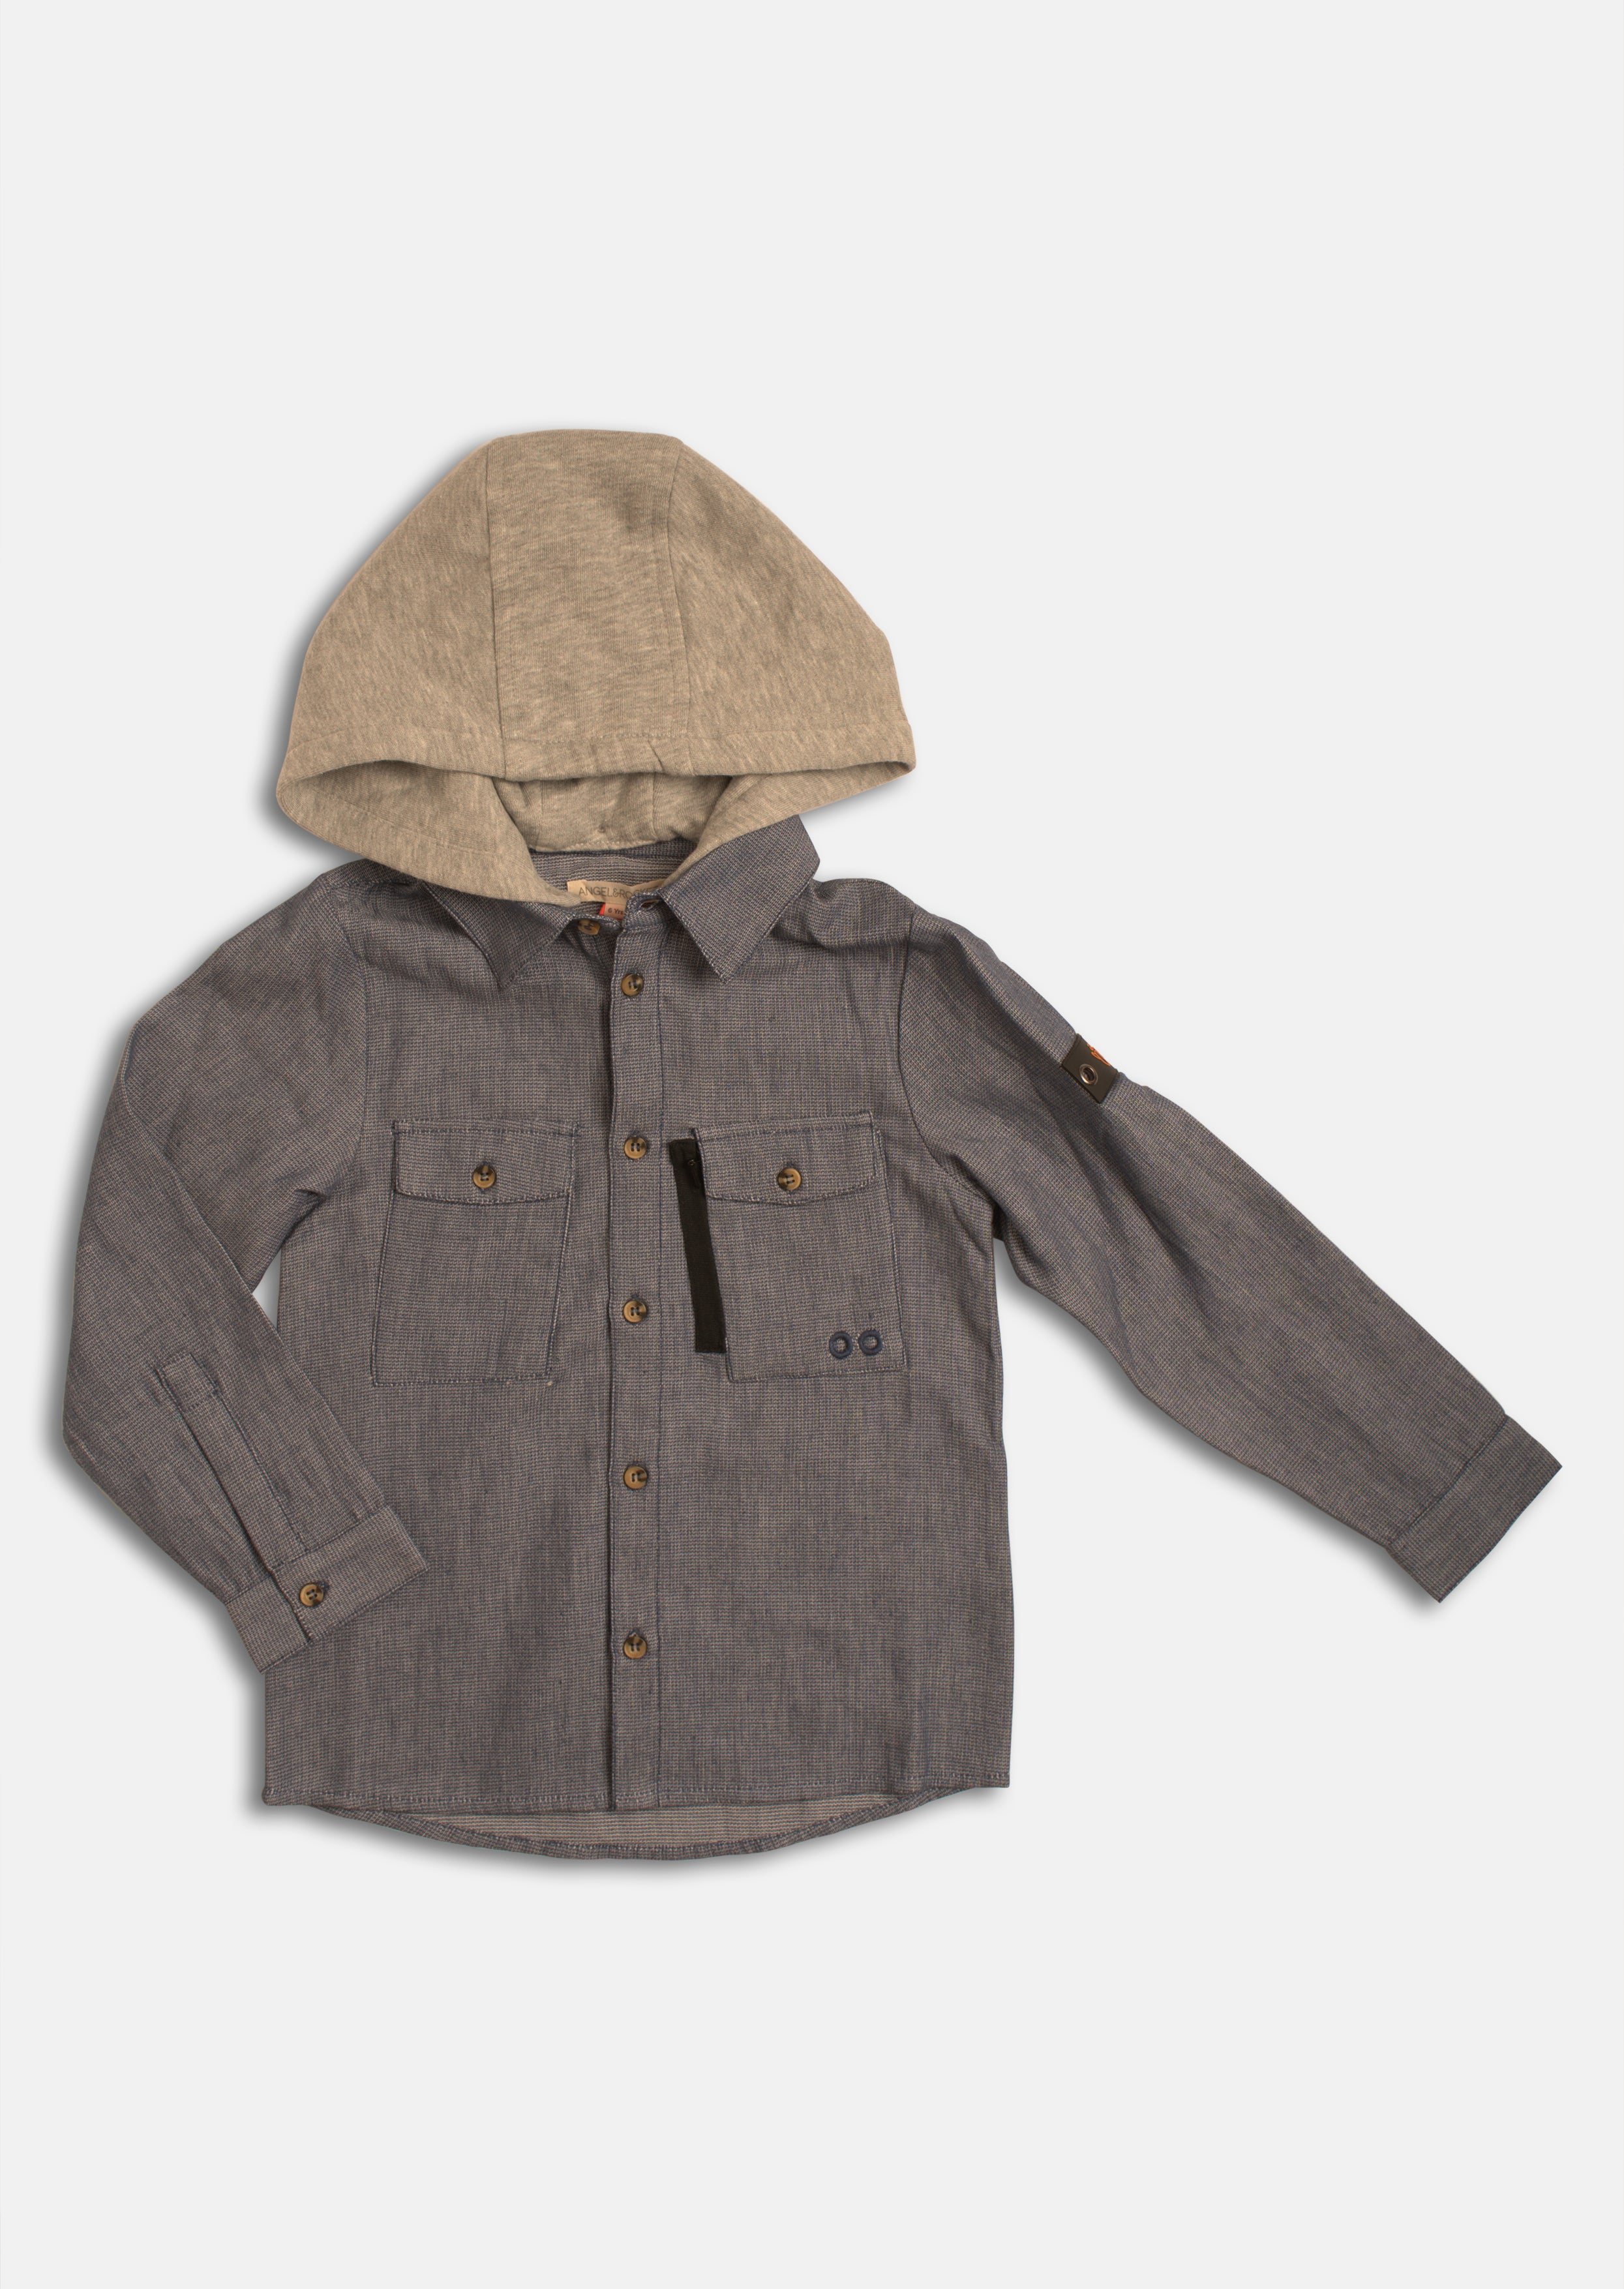 Boys Solid Brown Full Sleeves Shirt with Hooded